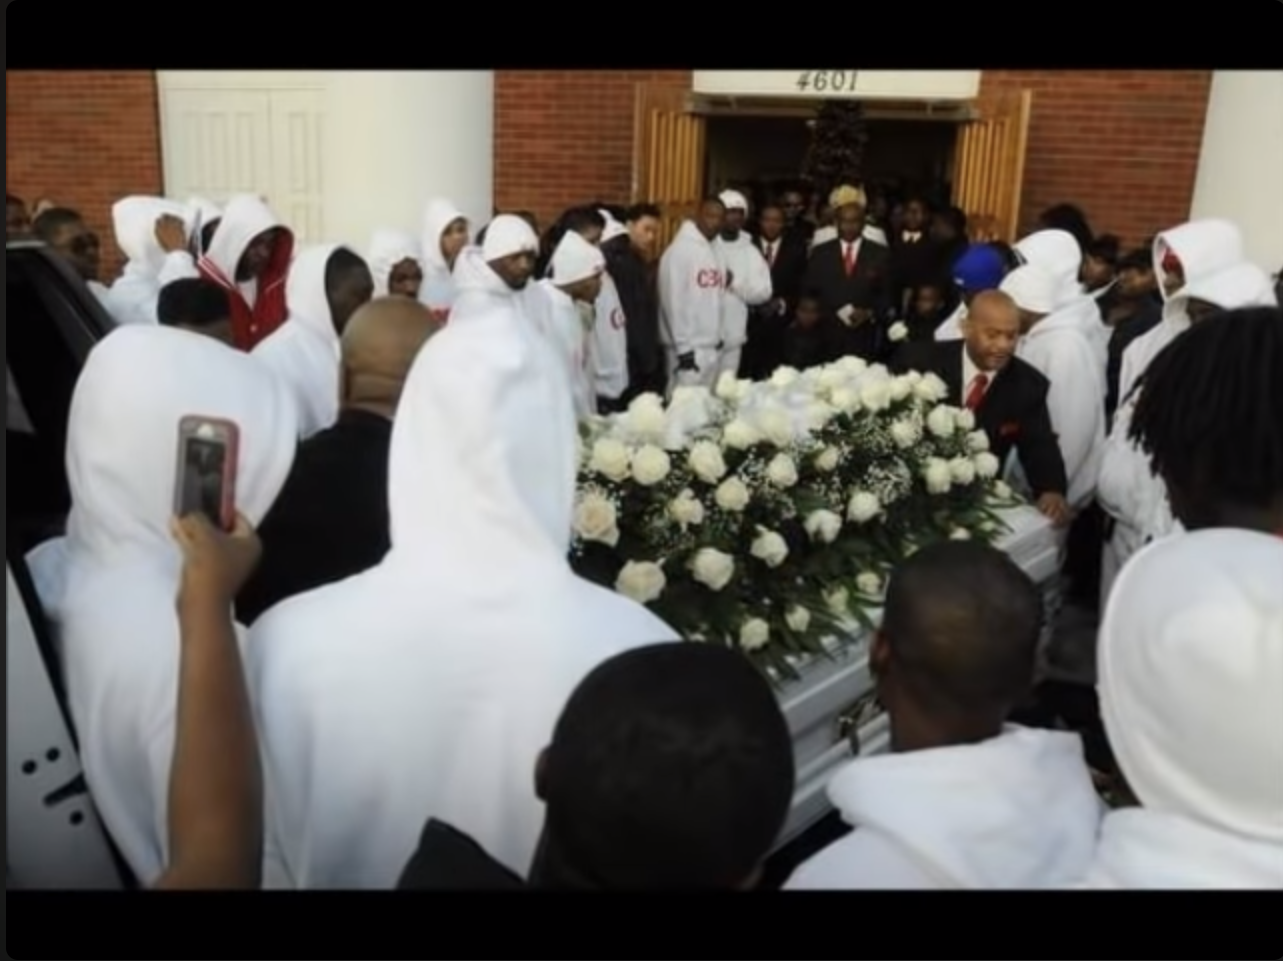 A group of people in white robes carrying a coffin

Description automatically generated